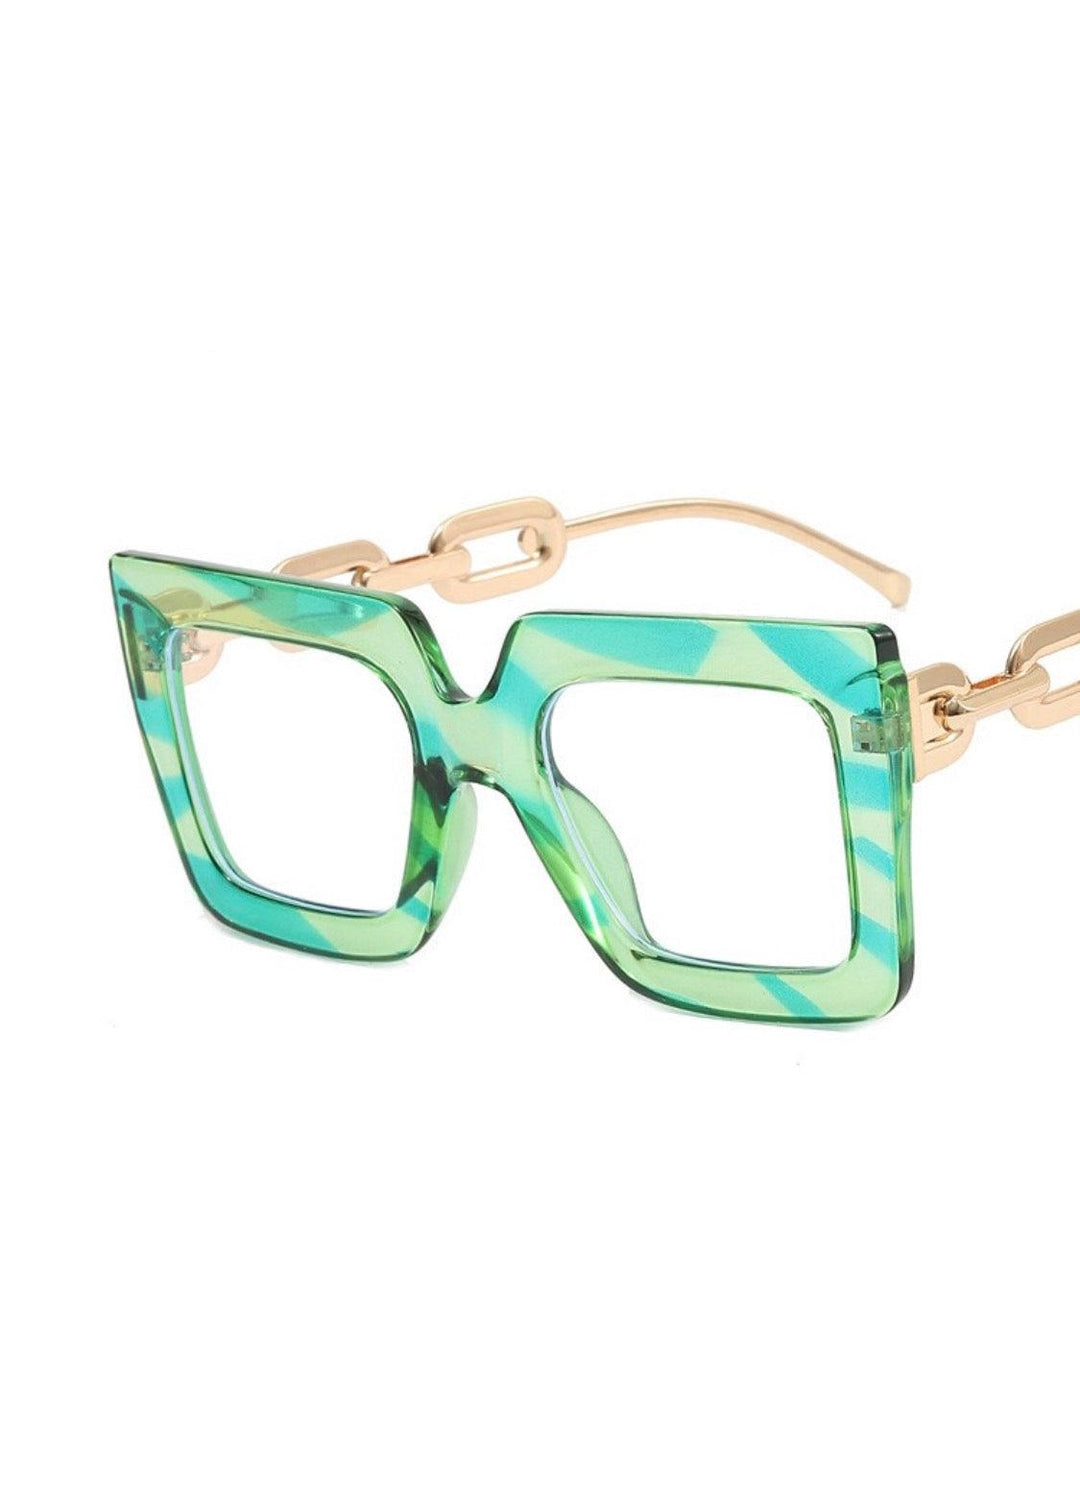 Oversized square glasses in Lagos, Nigeria - All Things Chic